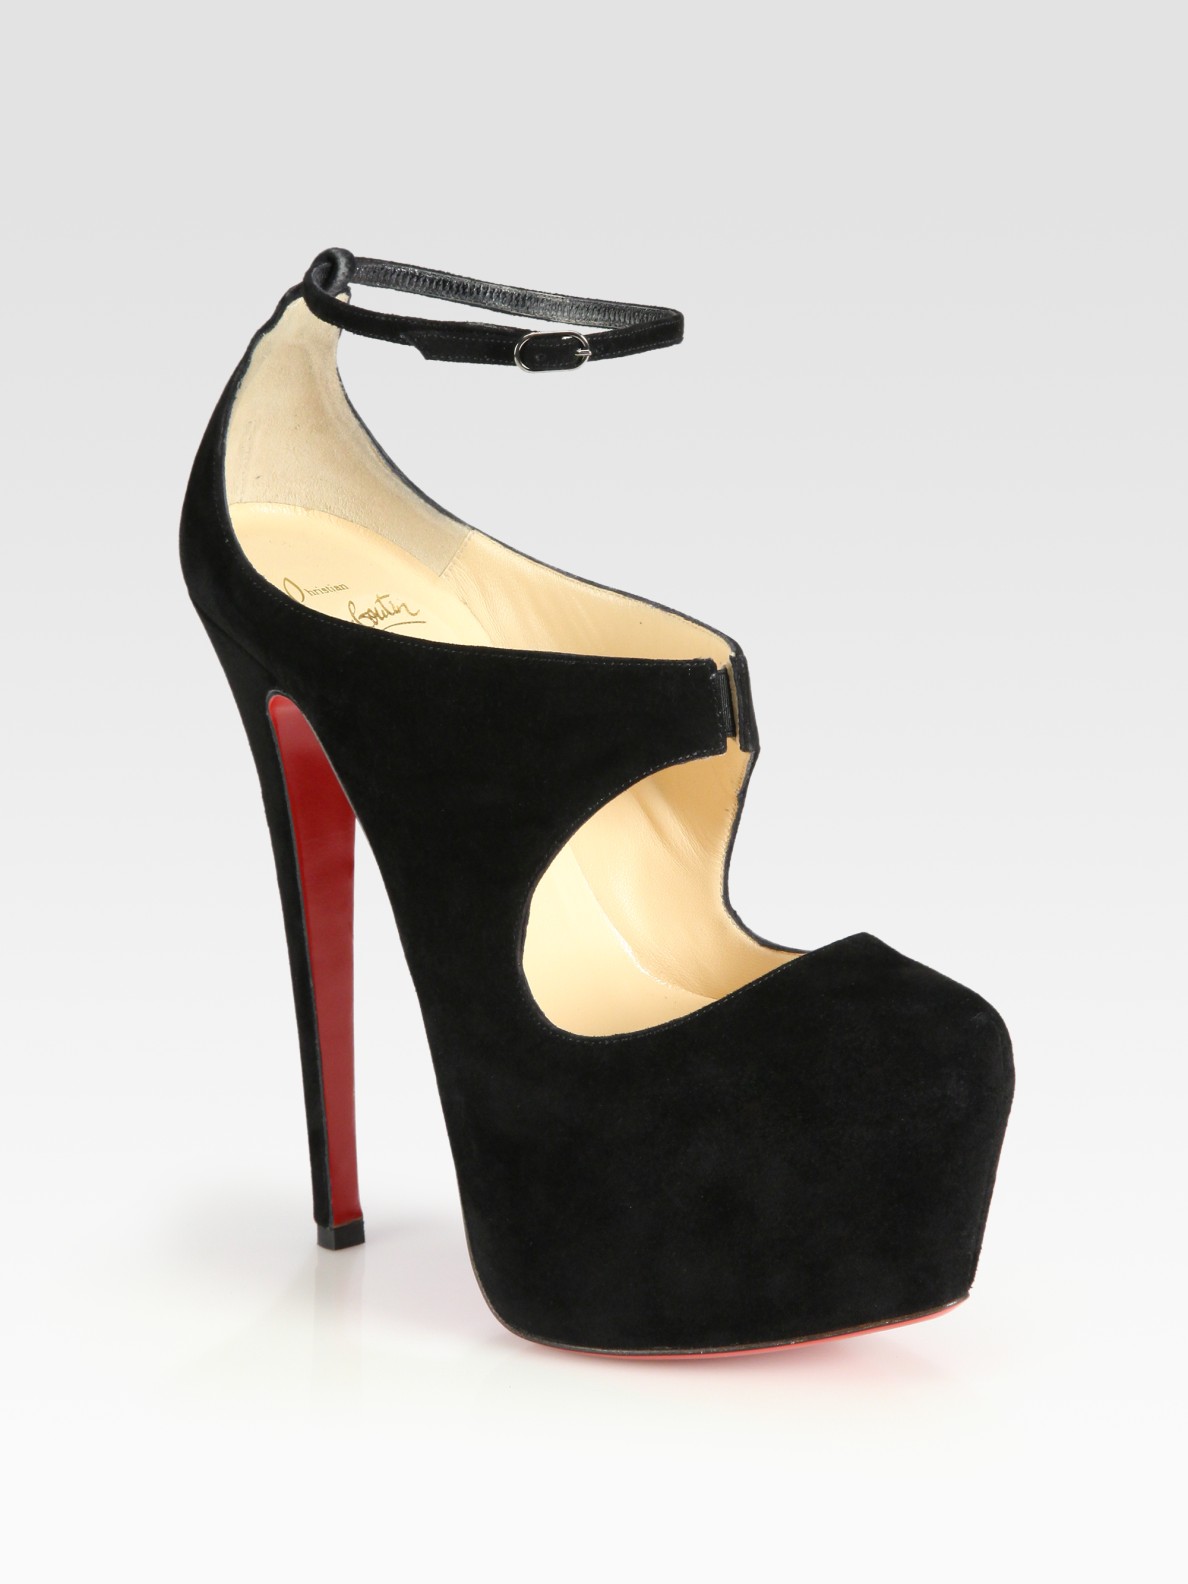 Lyst - Christian Louboutin Maillot Suede Mary Jane Platform Pumps in Black